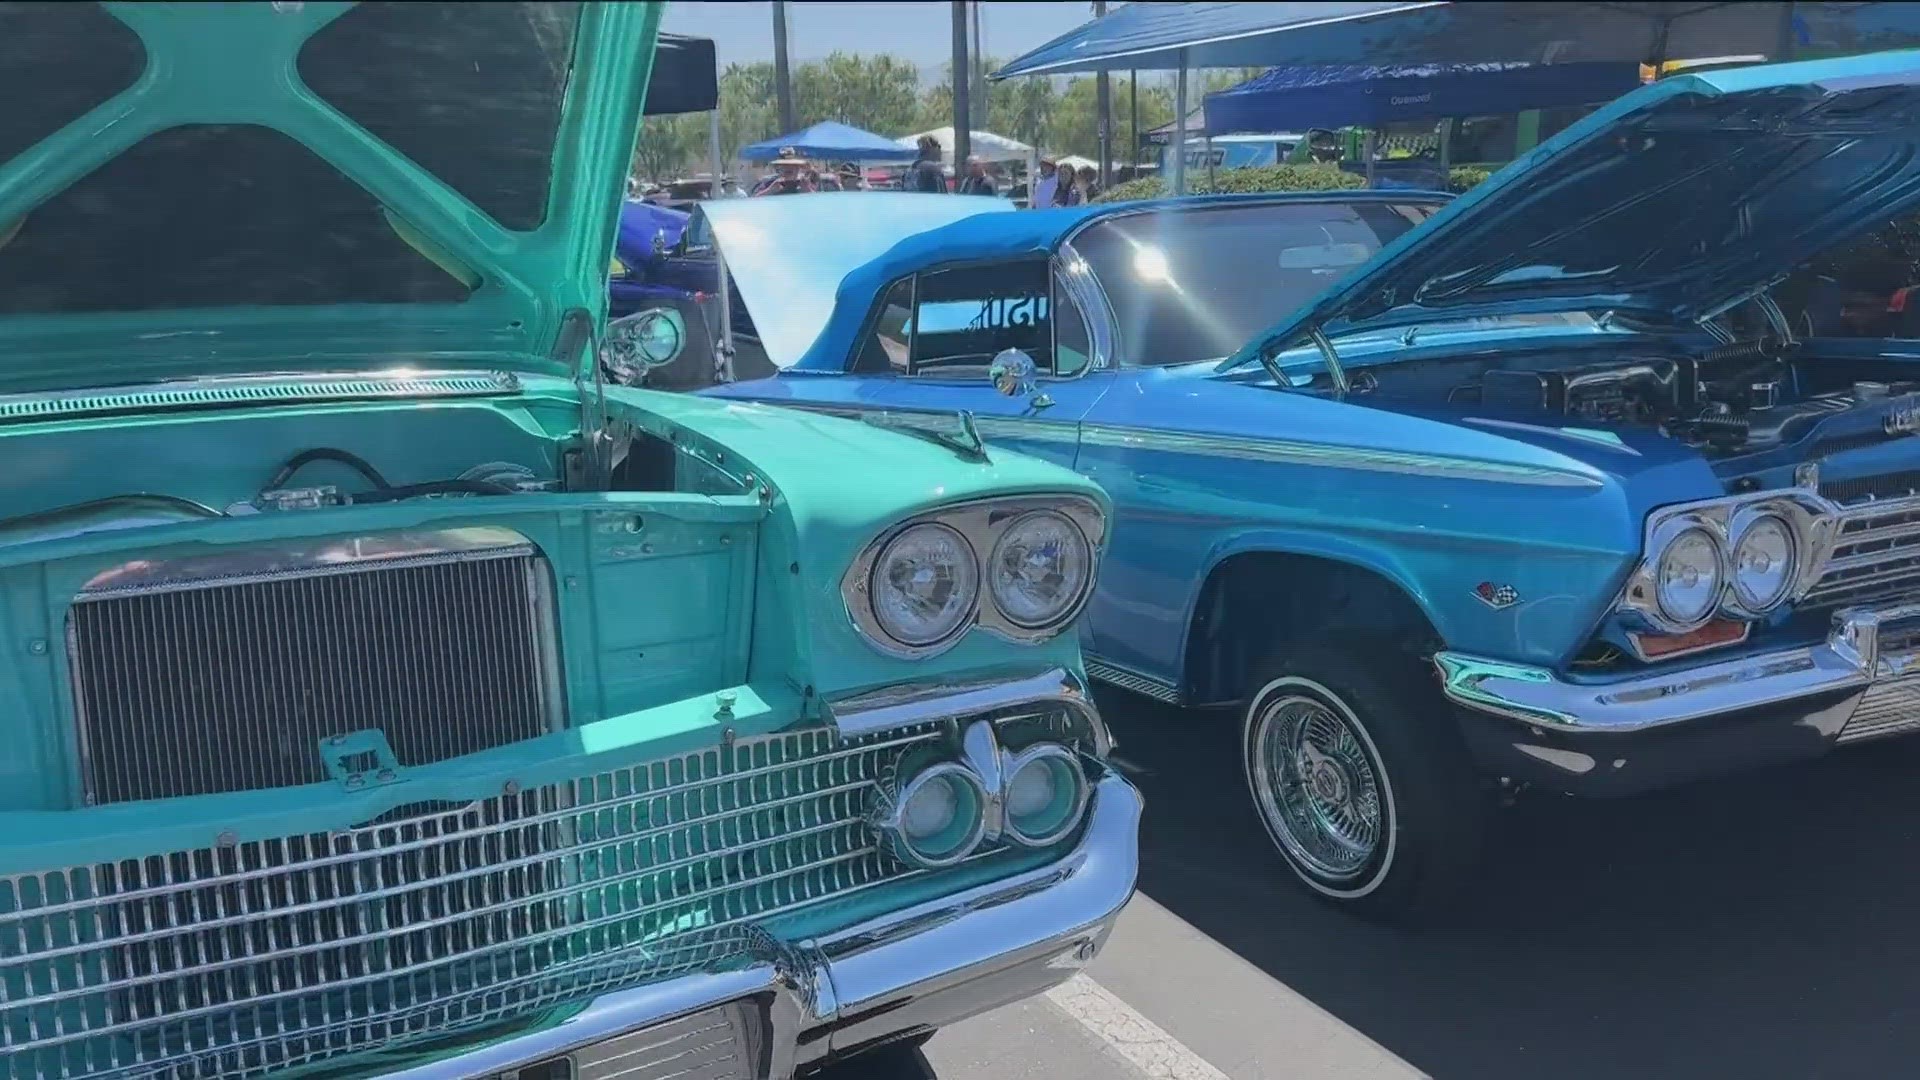 The 21st annual Cruise for a Cause event in Chula Vista brings together hundreds of low riders, bicycles and custom cars.